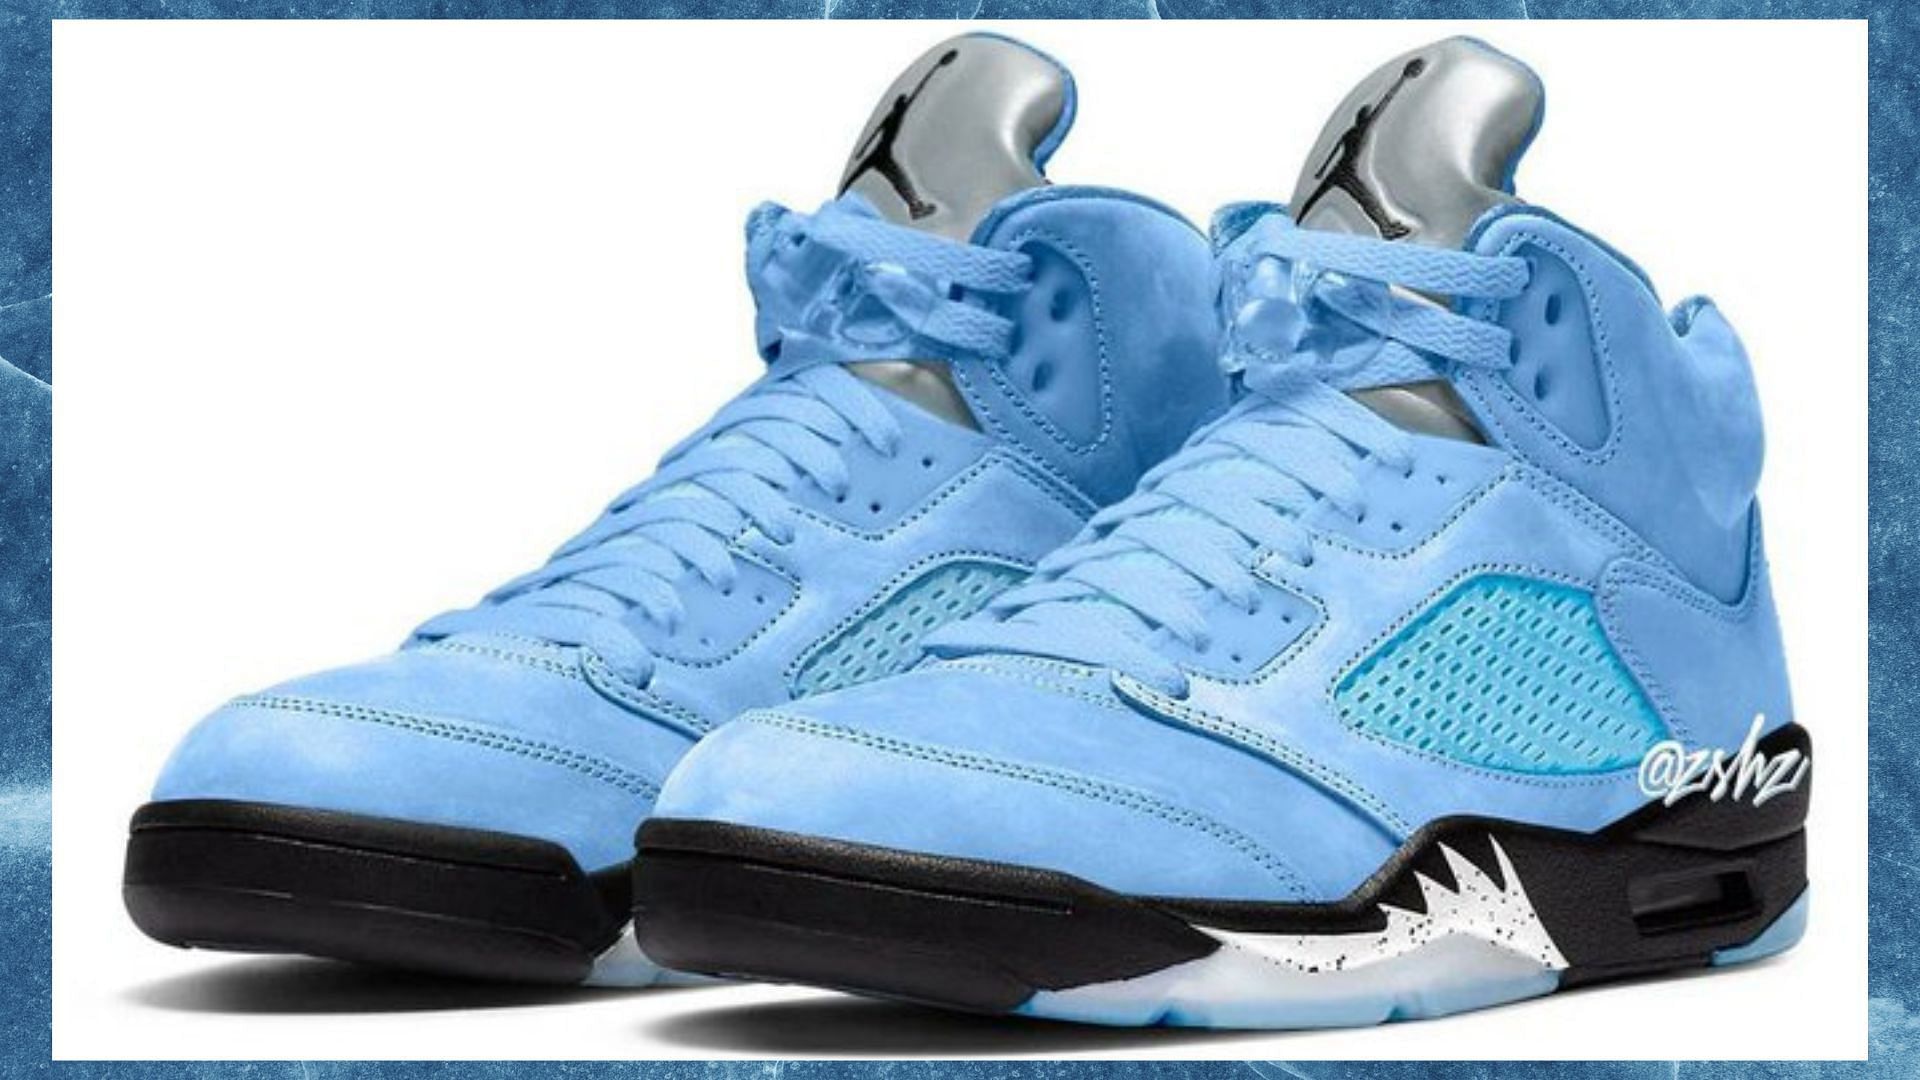 Where to buy Air Jordan 5 UNC shoes? Price, release date, and more details explored